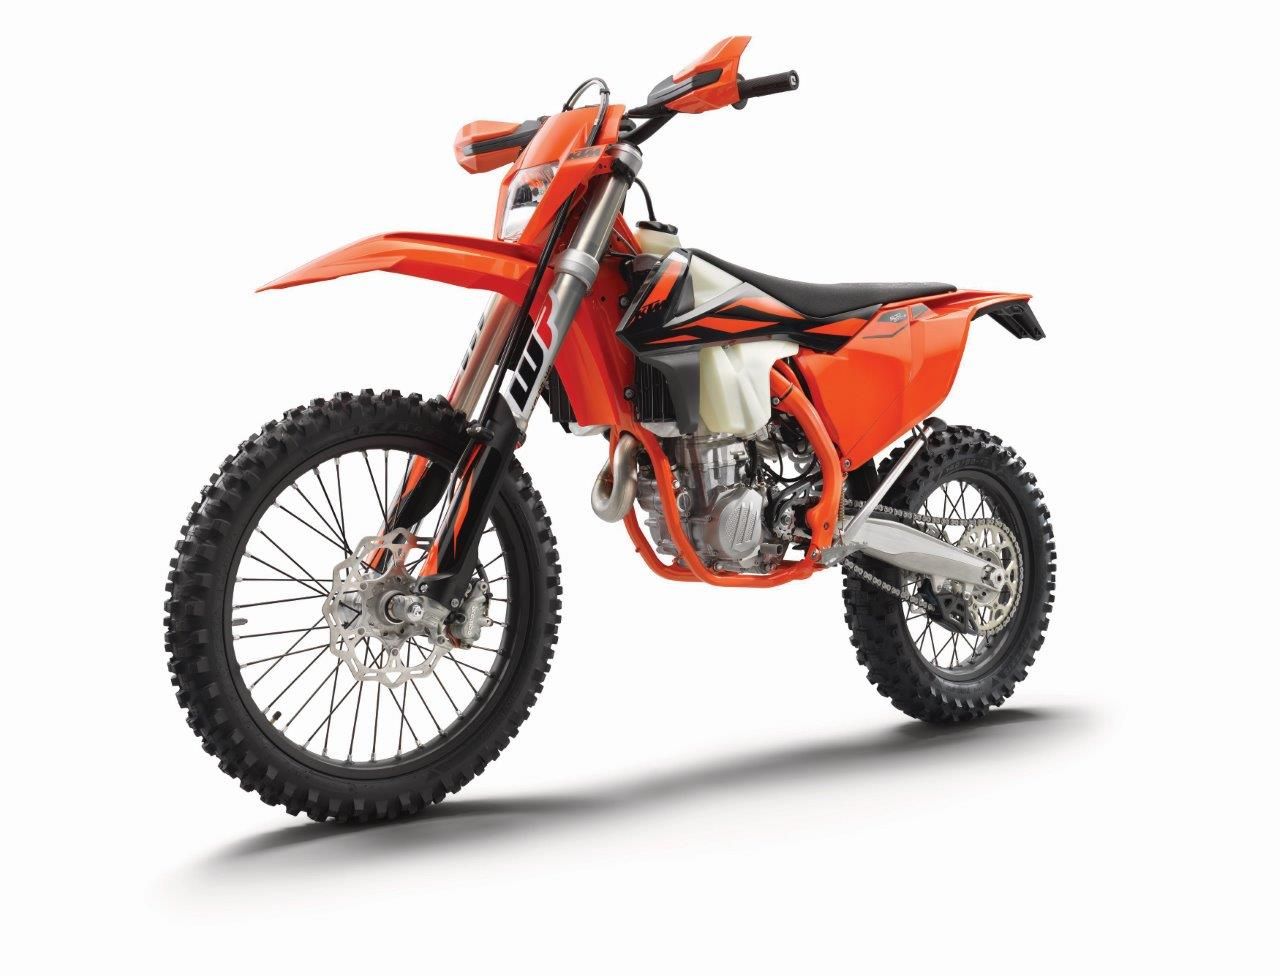 This is what makes the KTM 500 EXC-F one of the best dual sport motorcycles of 2021